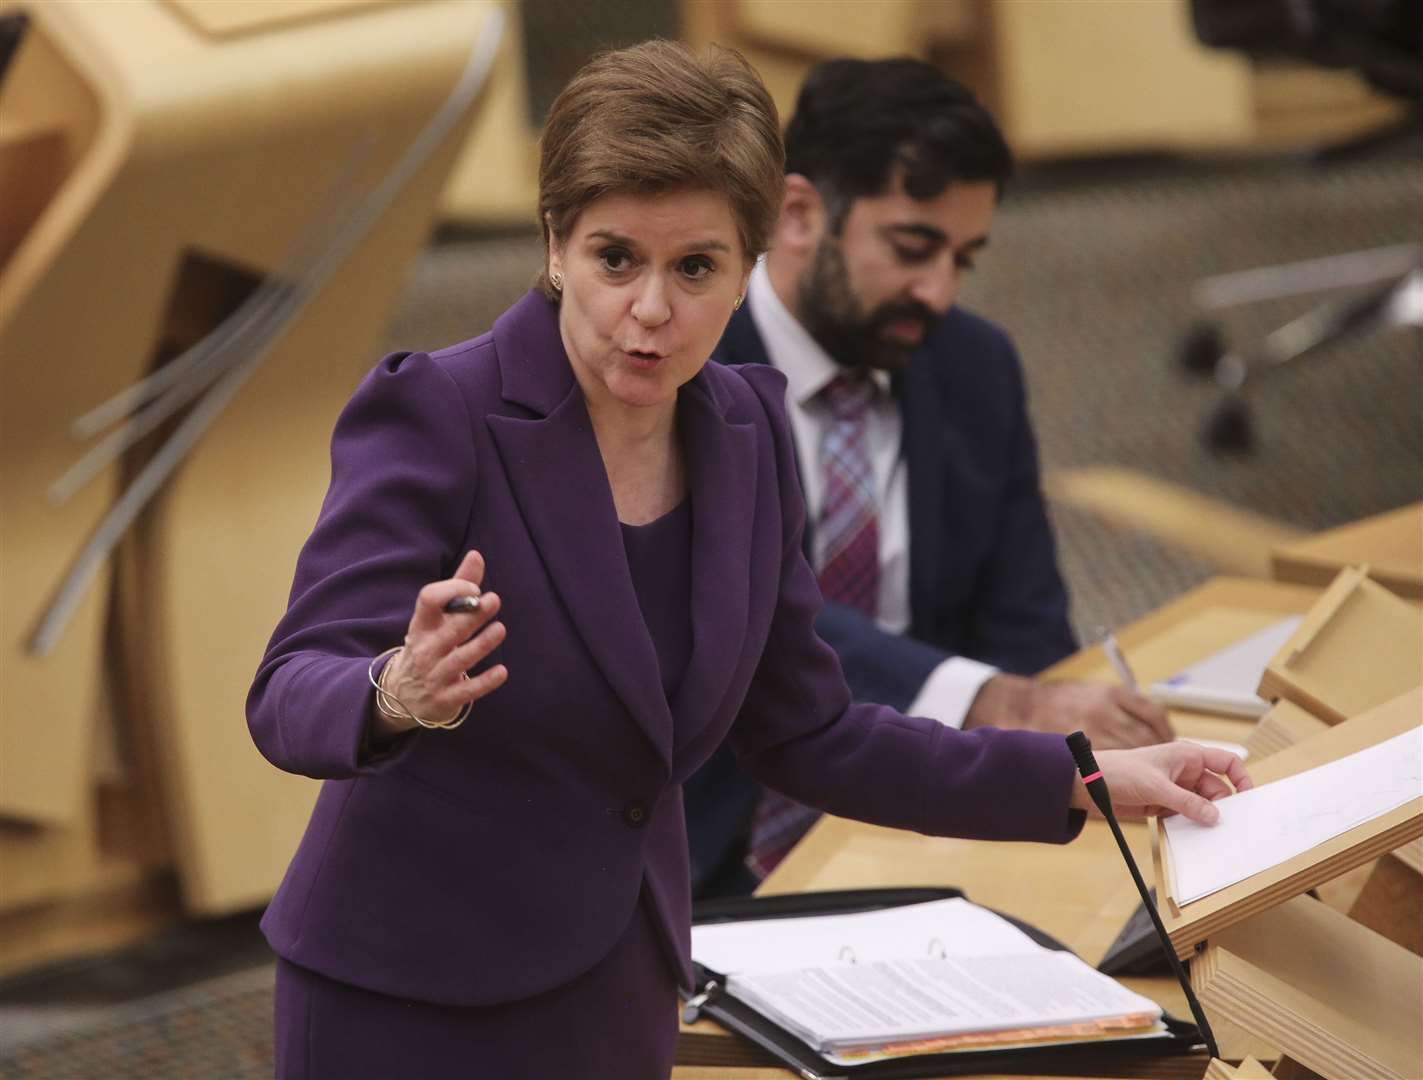 Nicola Sturgeon gave a Covid-19 statement at the Scottish Parliament (Fraser Bremner/Daily Mail/PA)